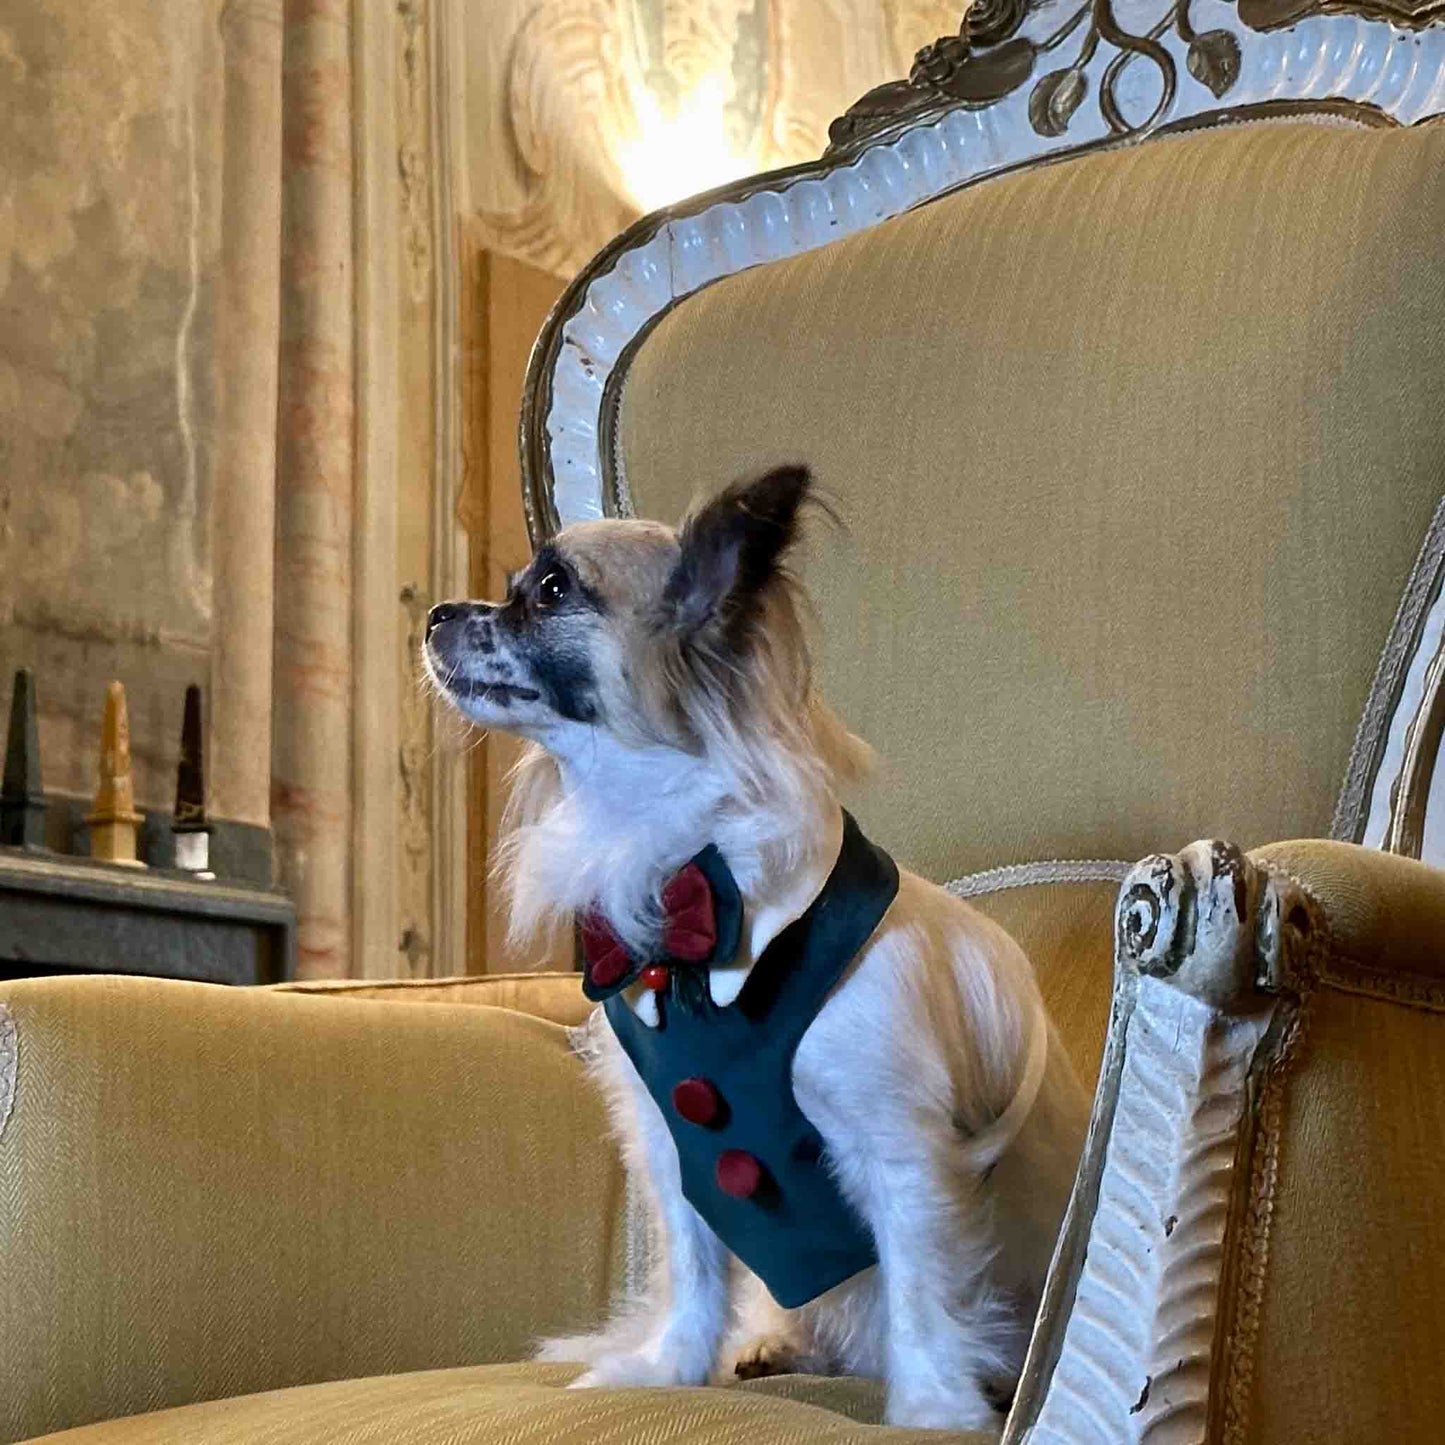 A small dog wearing a green vest with red buttons and a red bow tie is sitting on an ornate yellow armchair in a luxurious decorated room